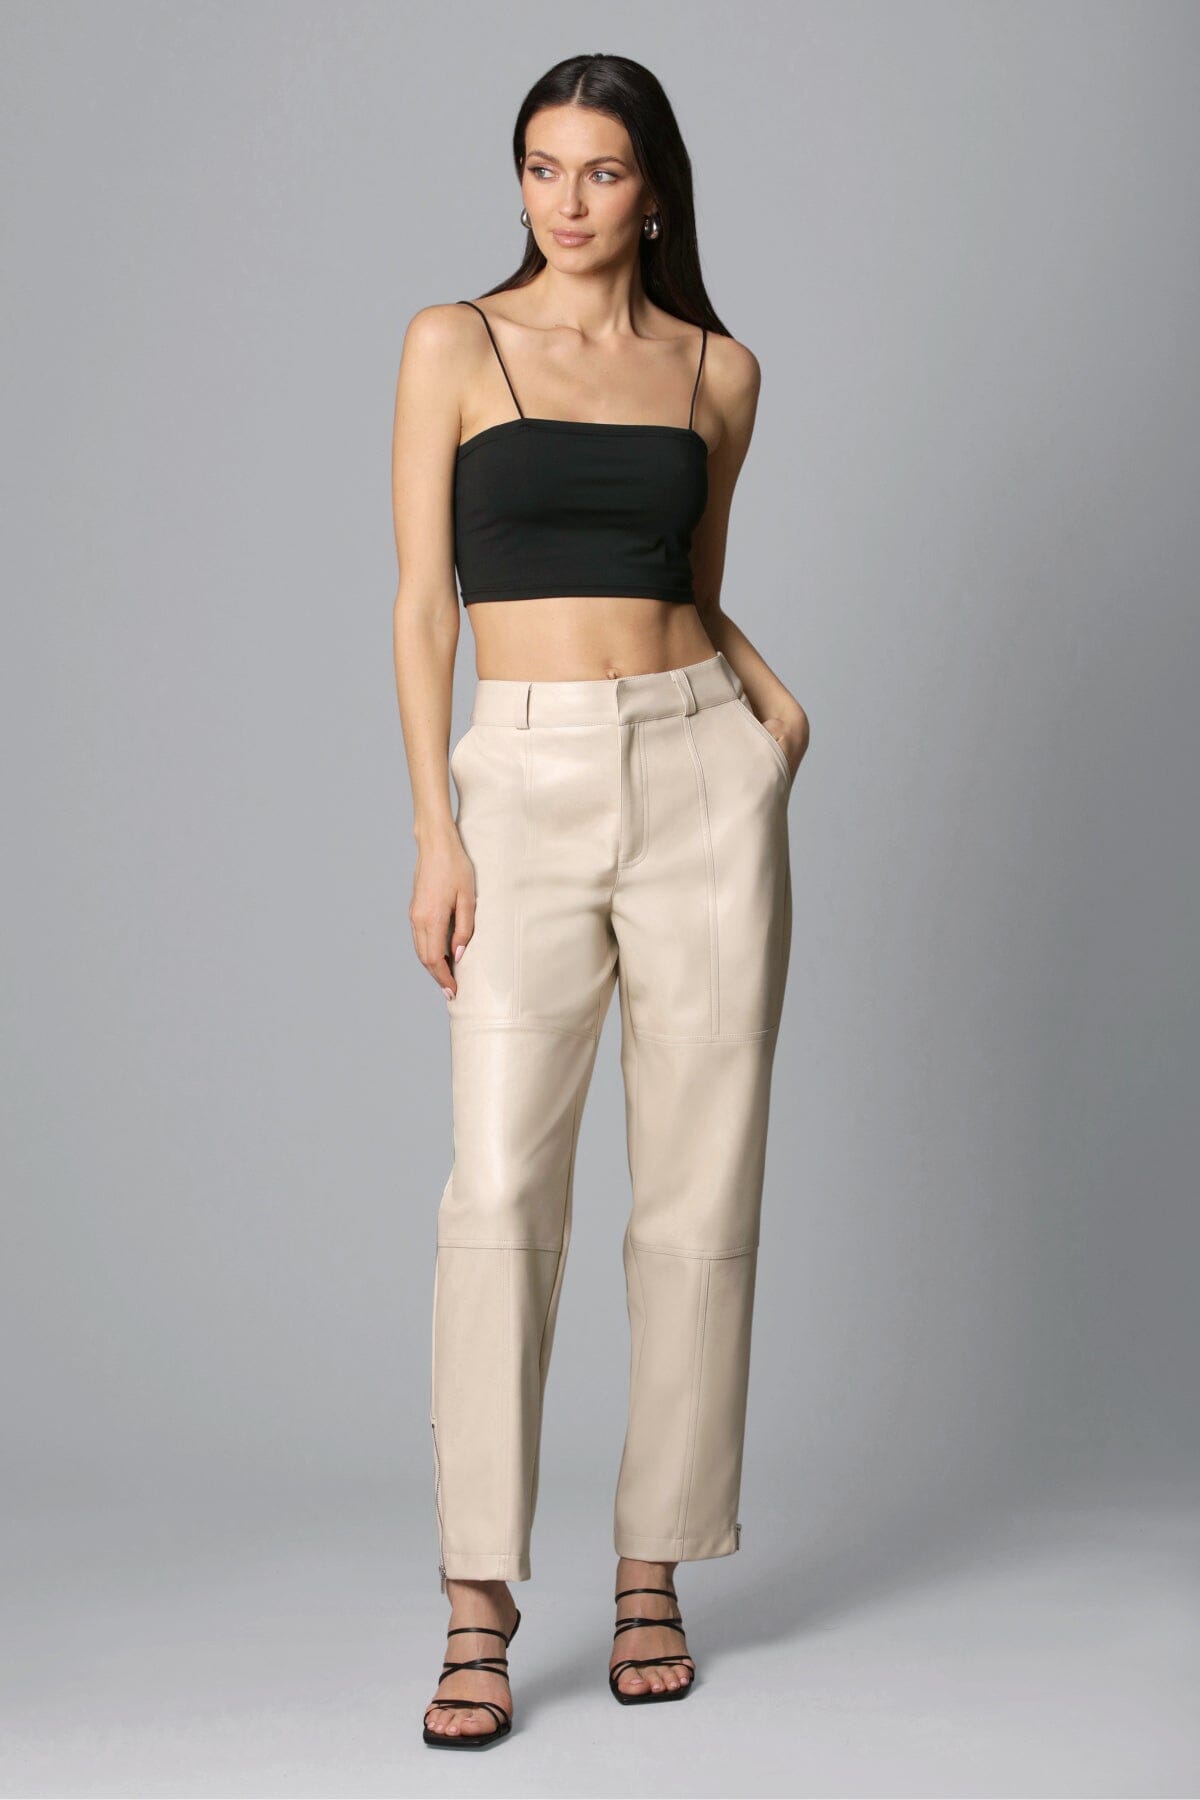 bone beige off white faux ever leather tapered pant - figure flattering office to date night pants for women